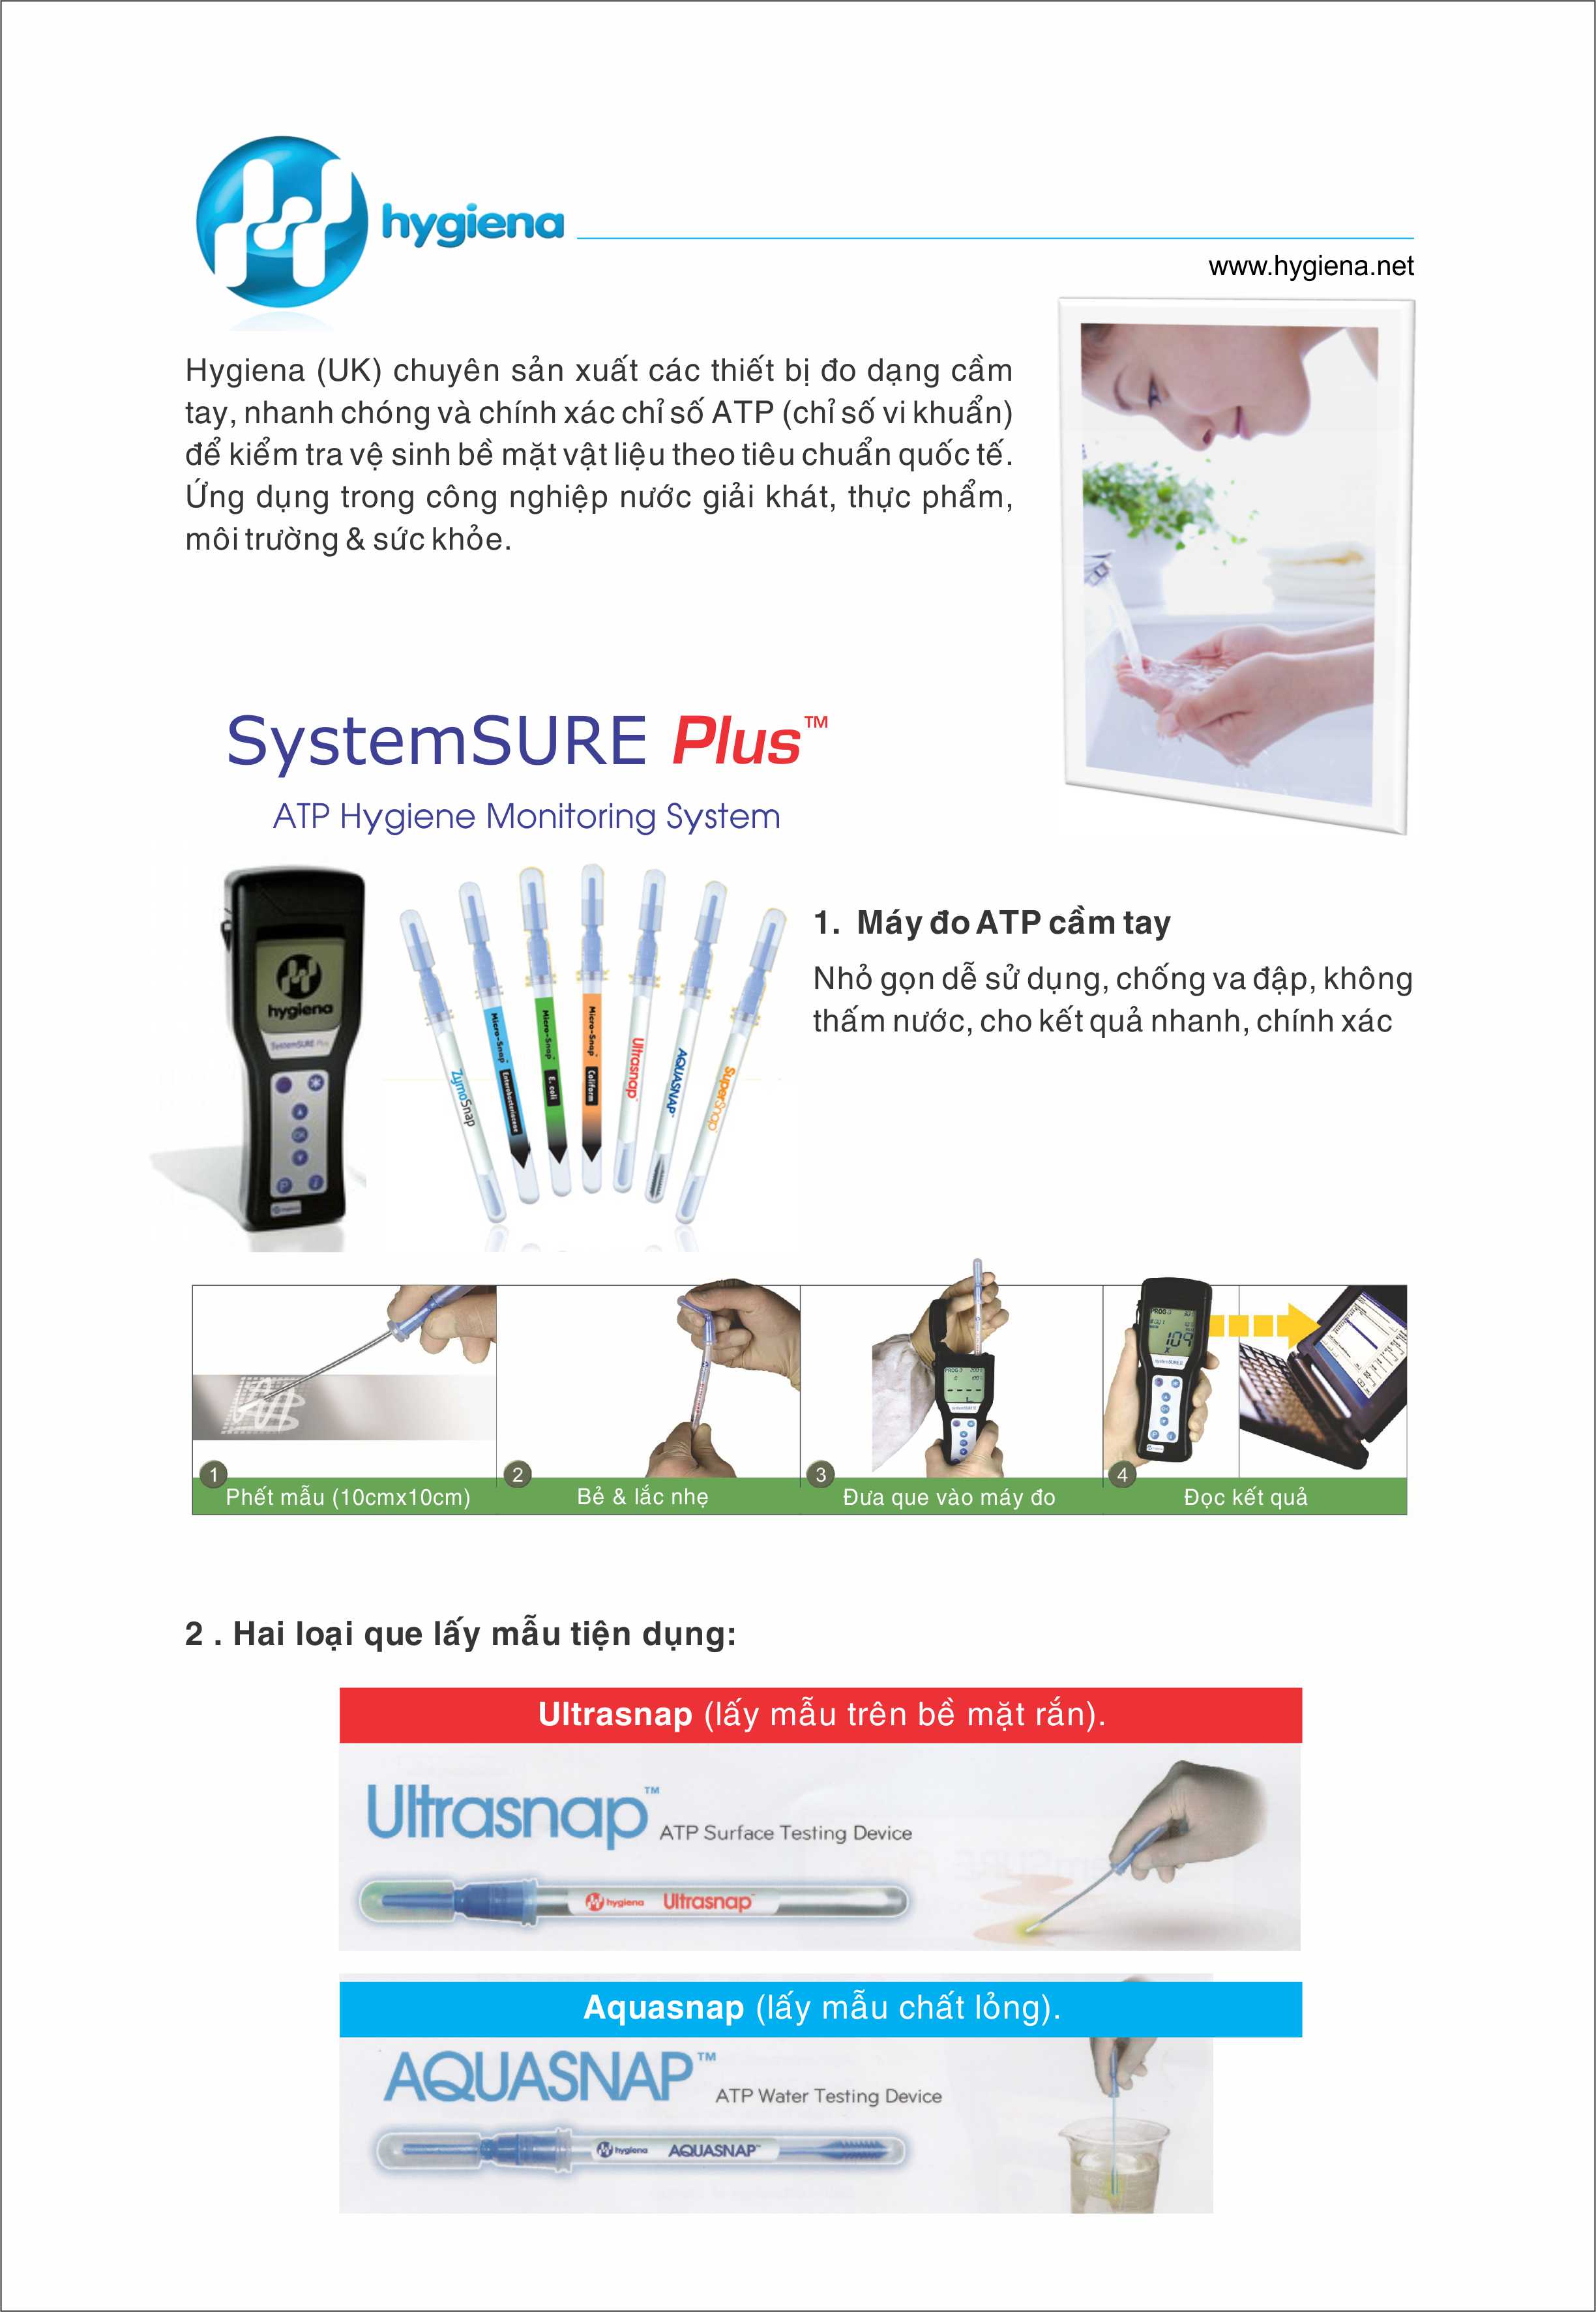 Hygiena products